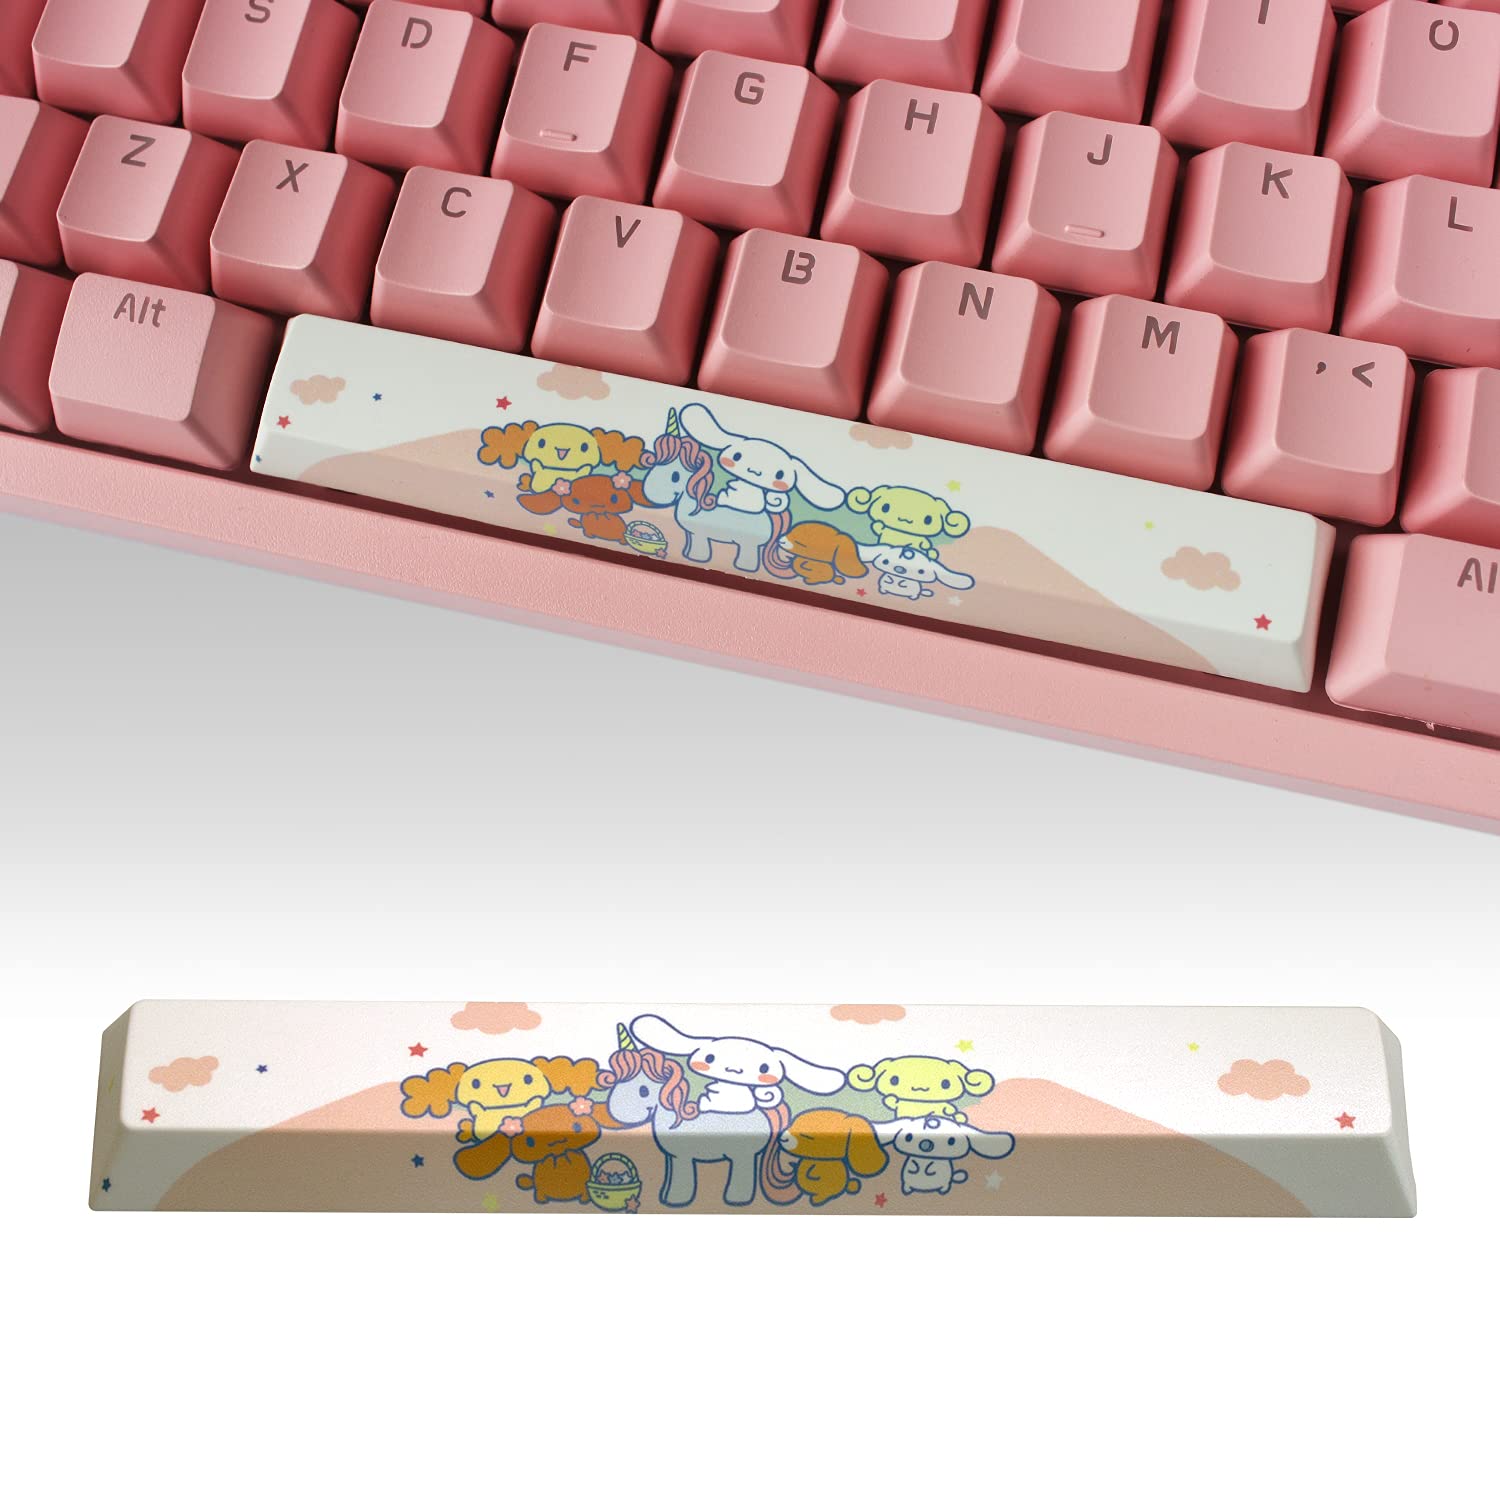 9-incredible-space-bar-keycap-for-2023